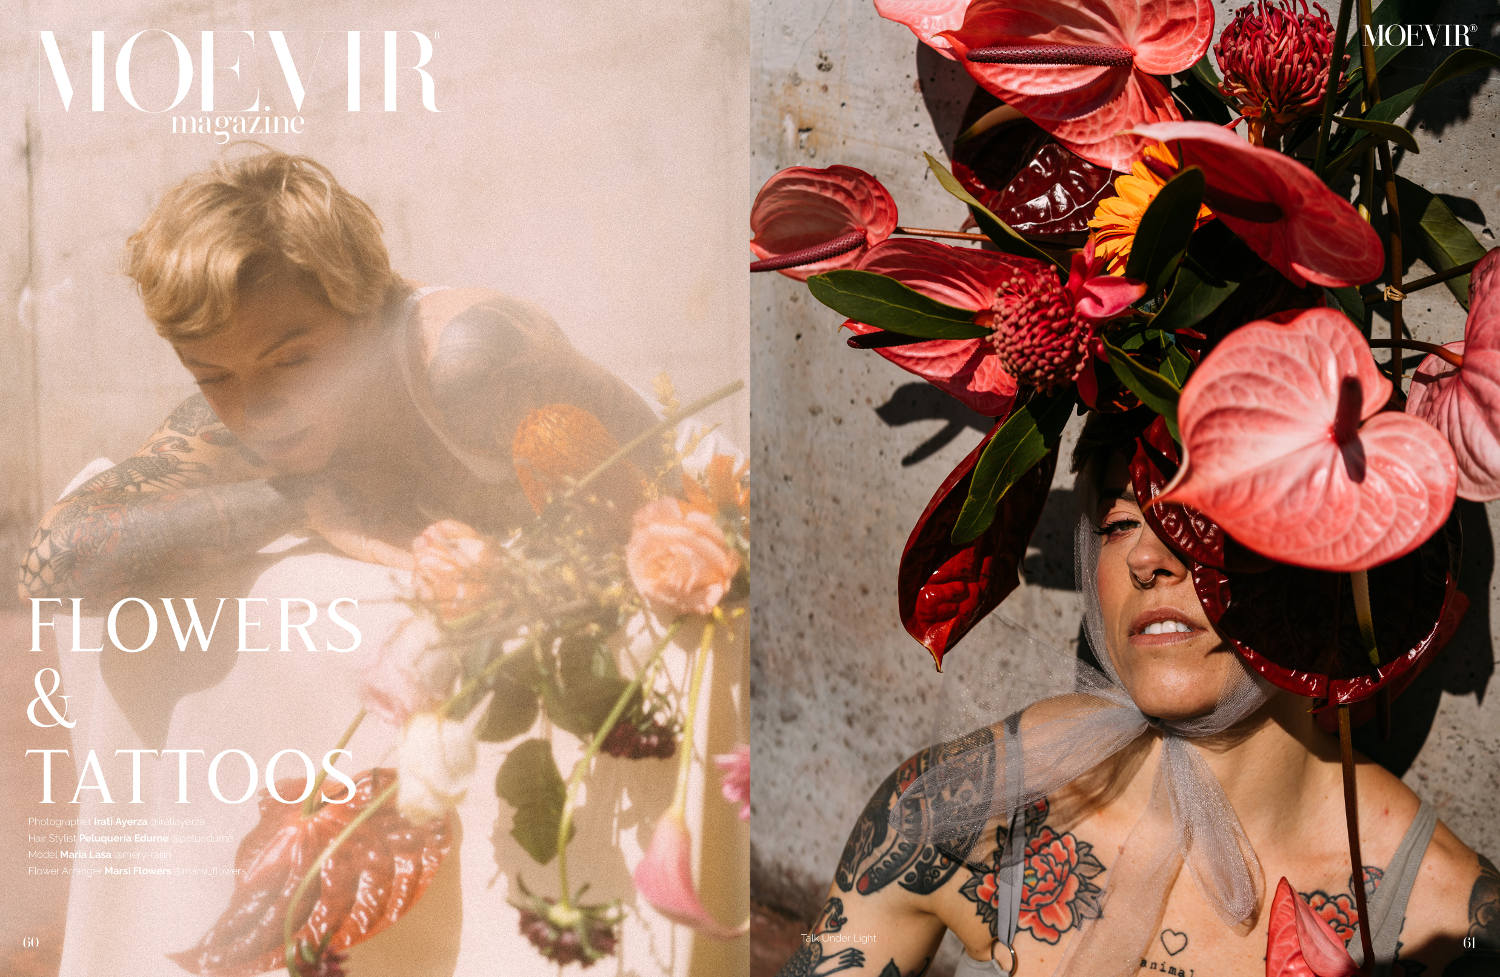 Flowers and Tattoos Moevir Magazine June Issue - by Irati Ayerza